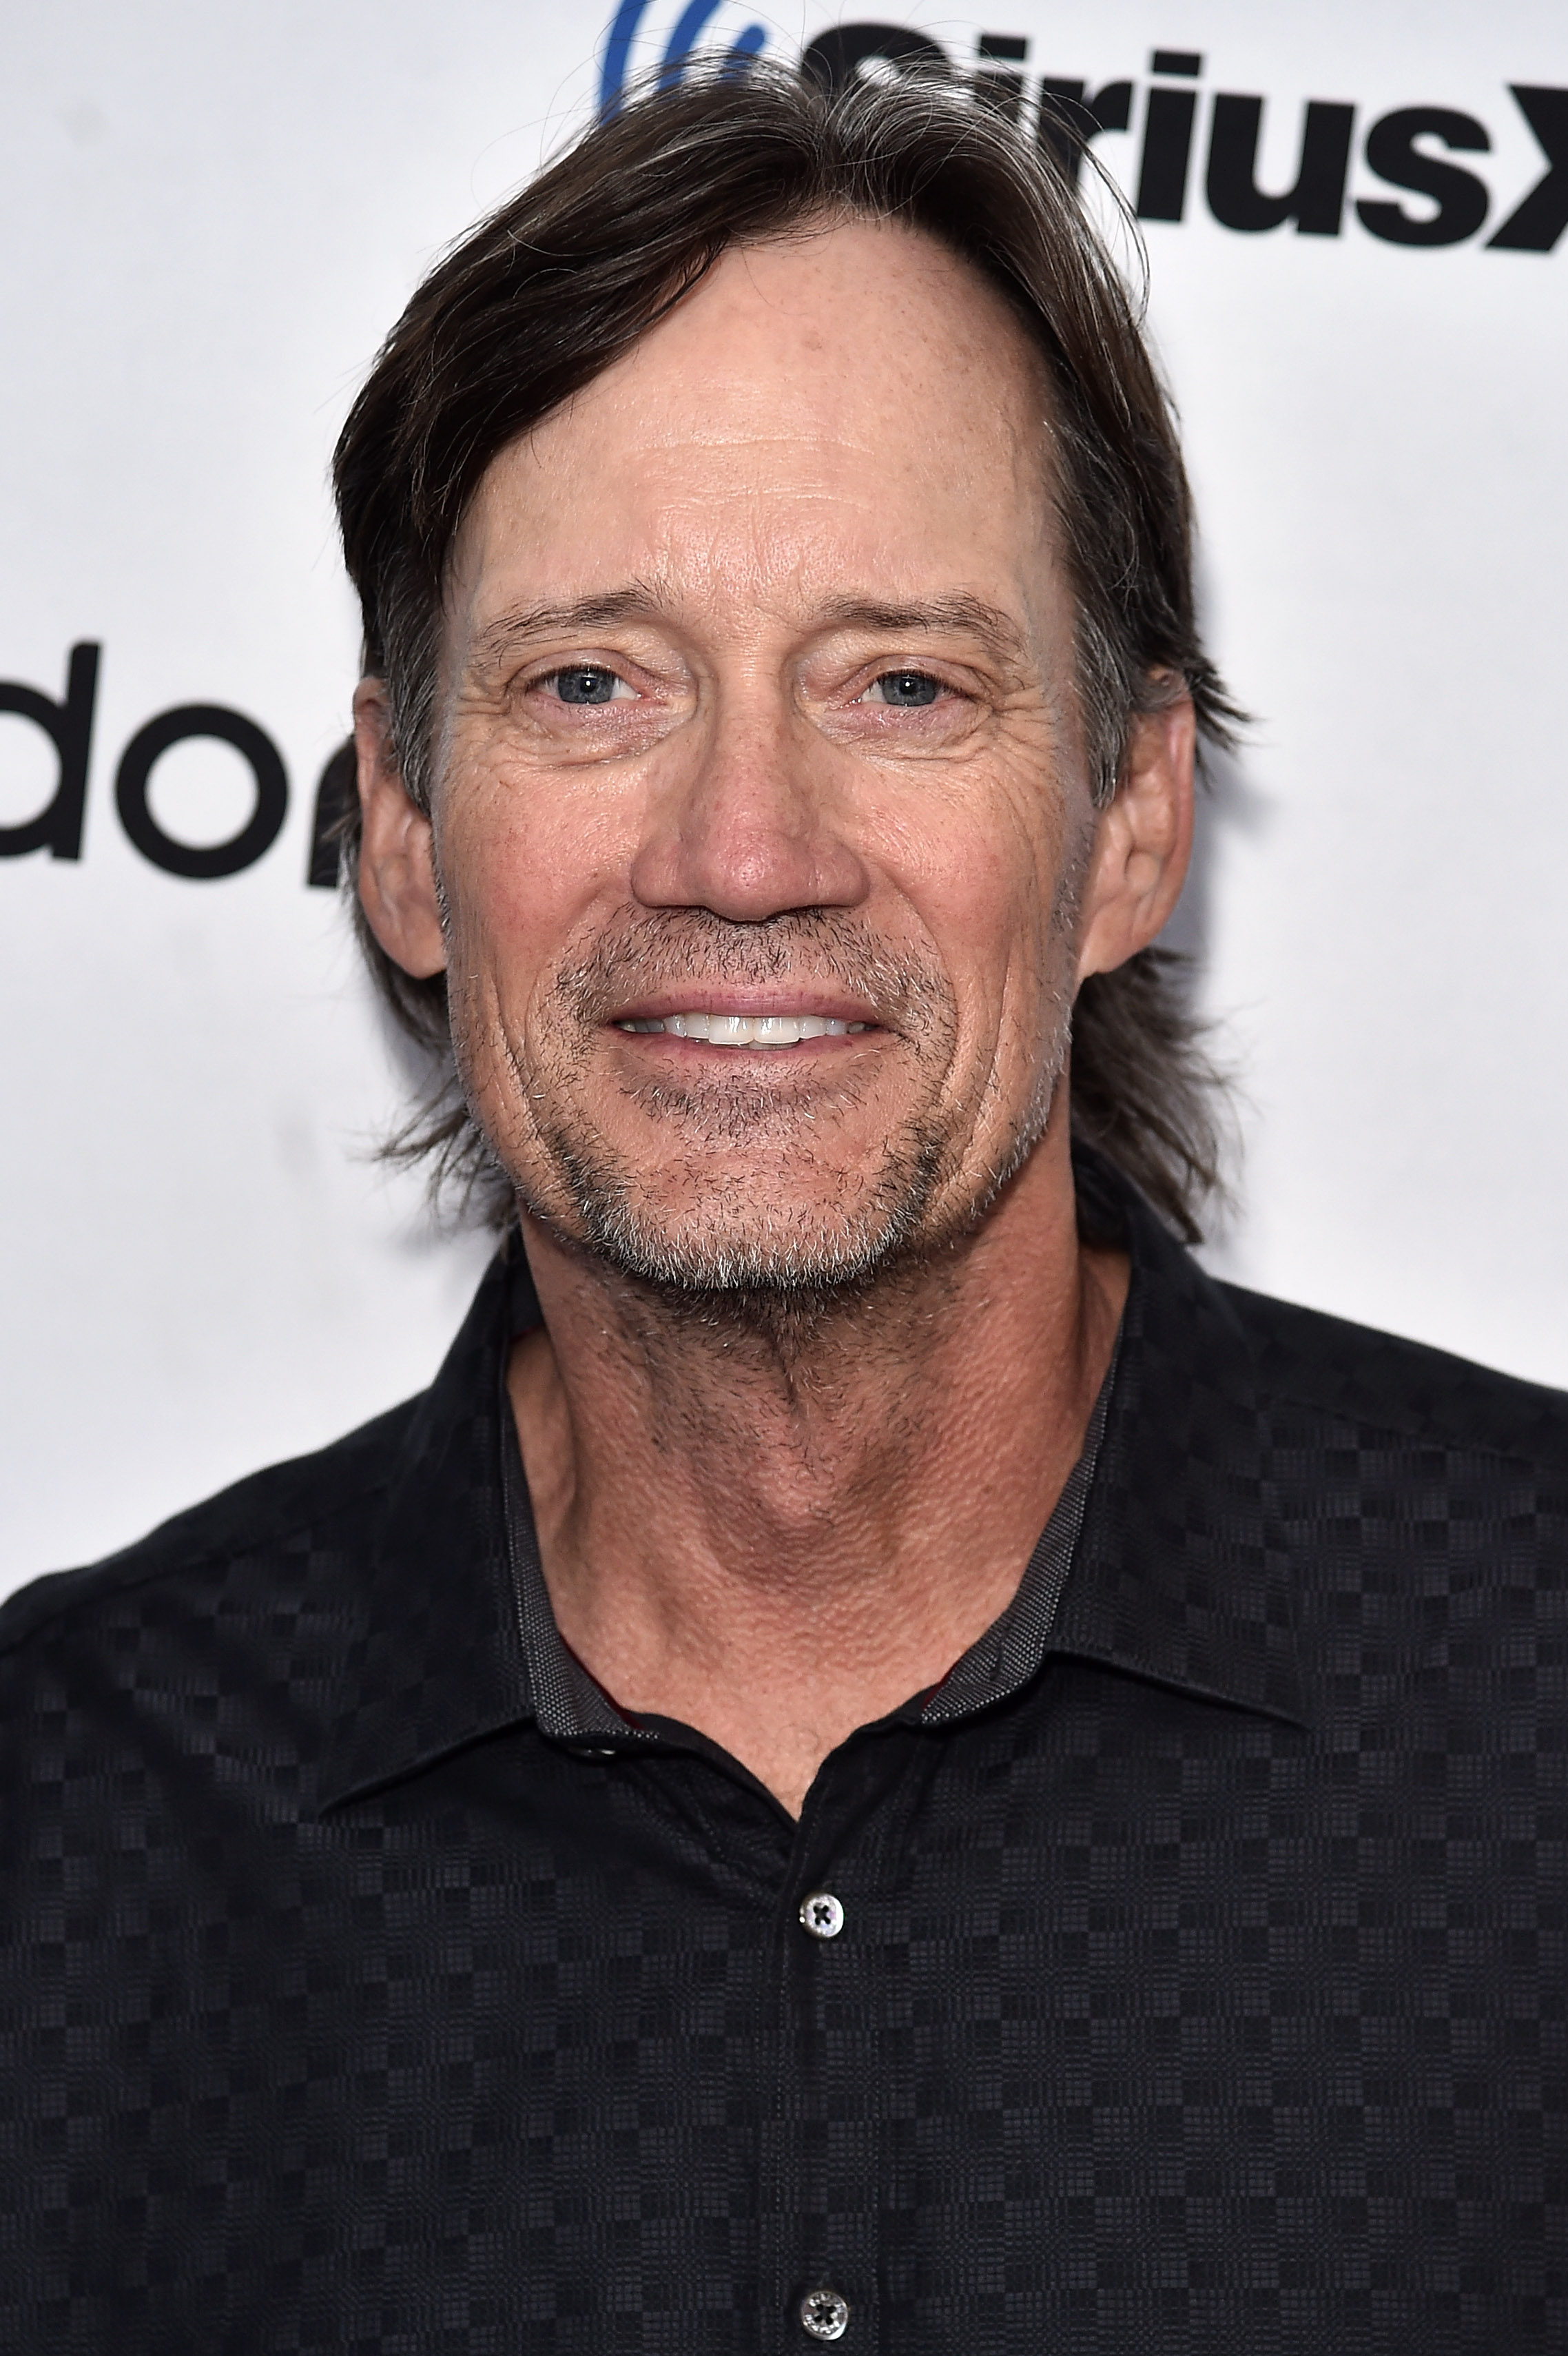 Kevin Sorbo at SiriusXM Studios in New York City on October 7, 2019 | Source: Getty Images